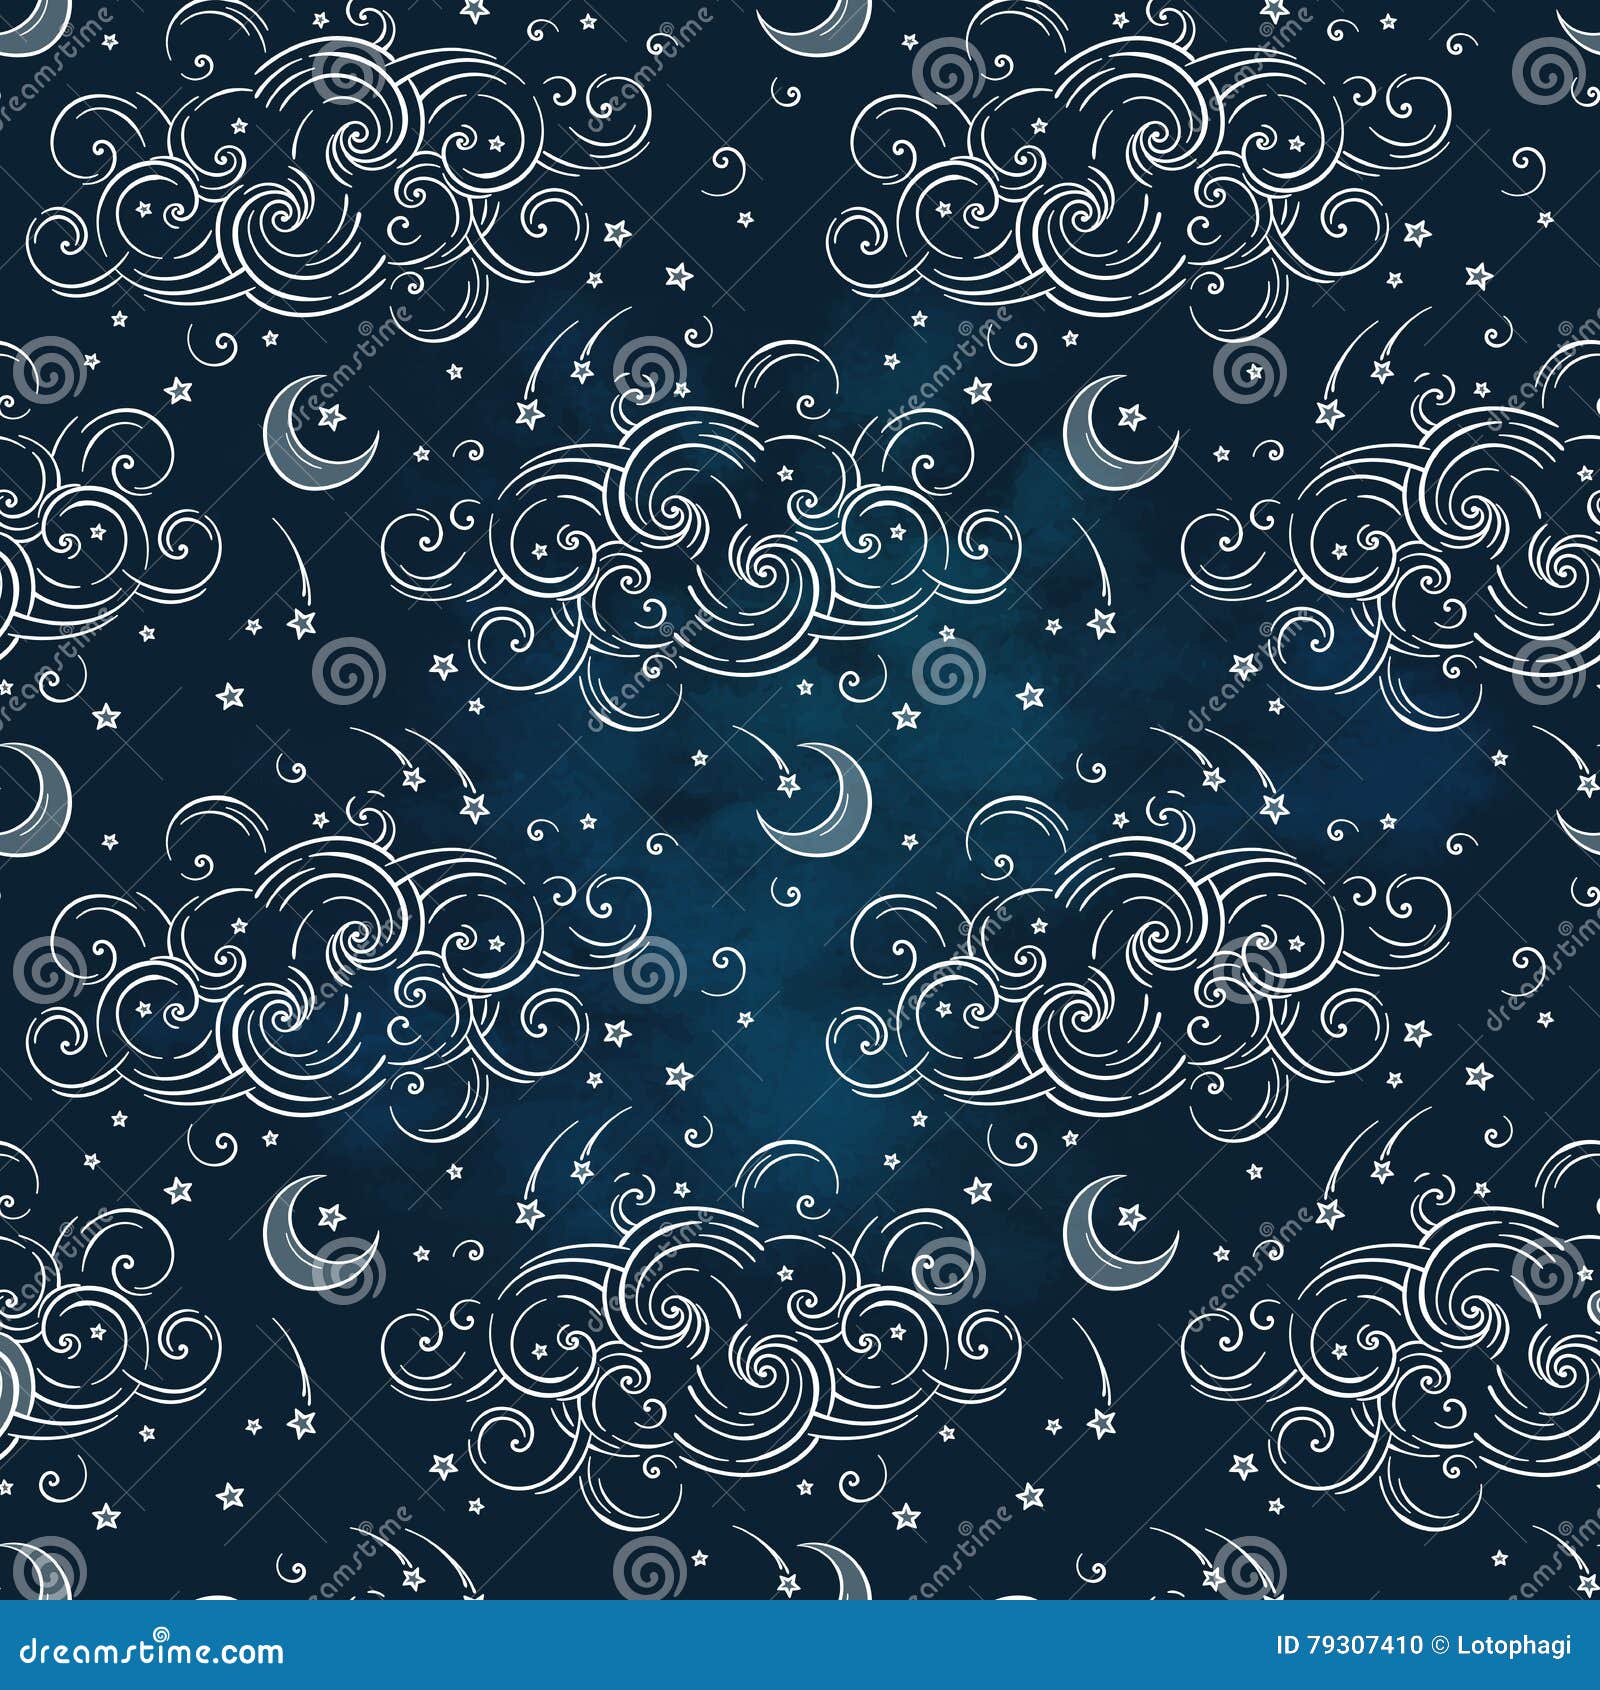  seamless pattern with celestial bodies - moons, stars and clouds. boho chic print hand drawn textile 